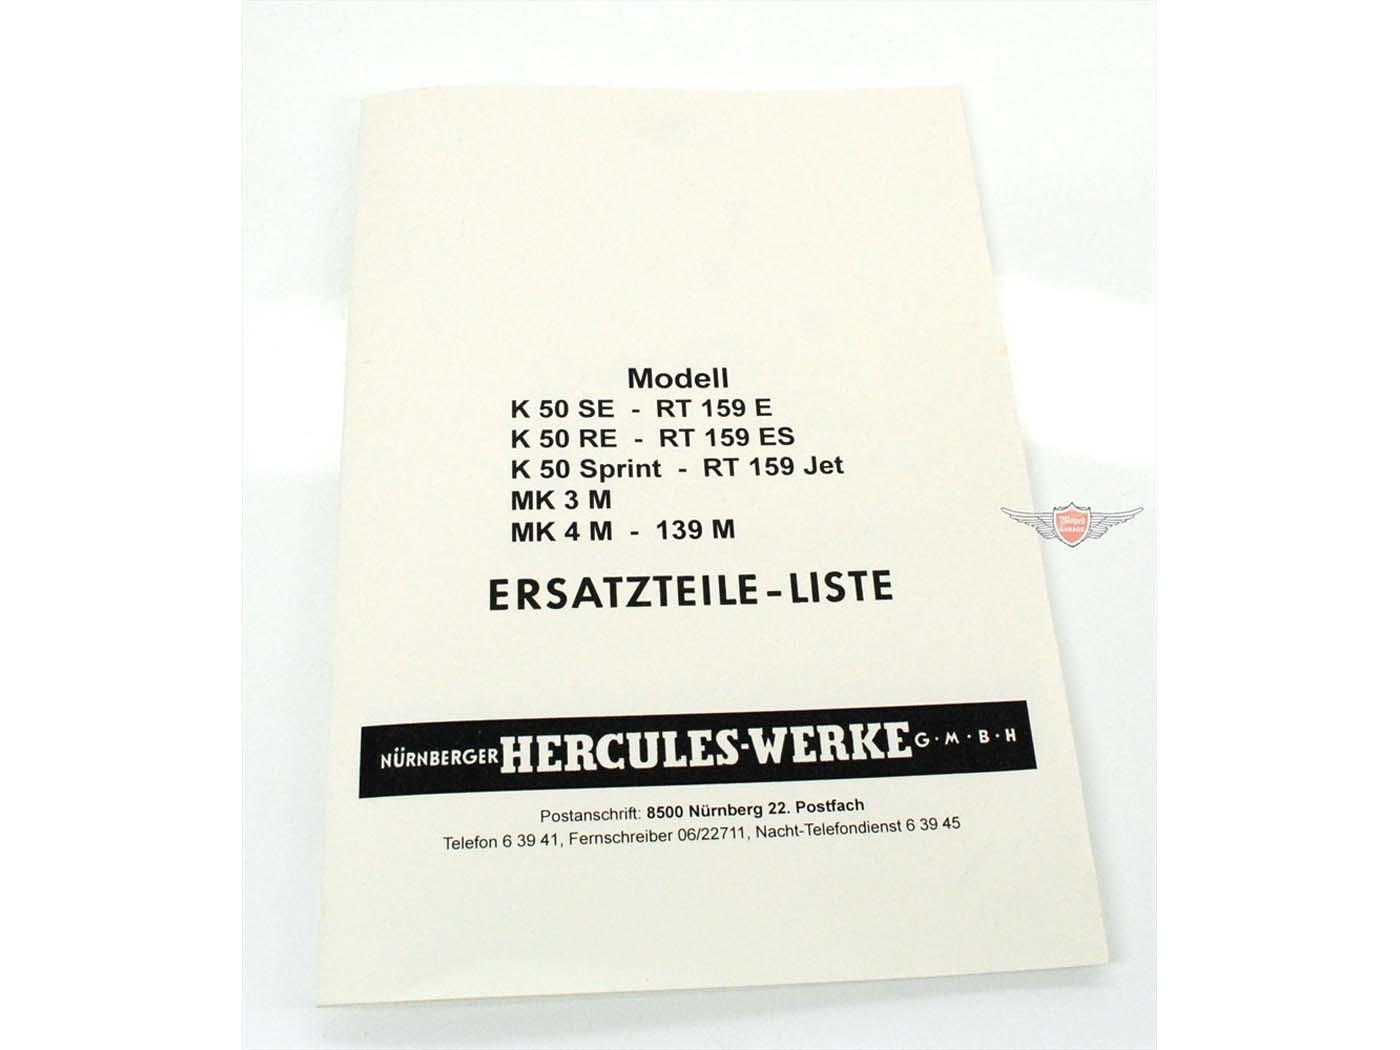 Spare Parts Catalog For DKW RT 159 139 M Mokick